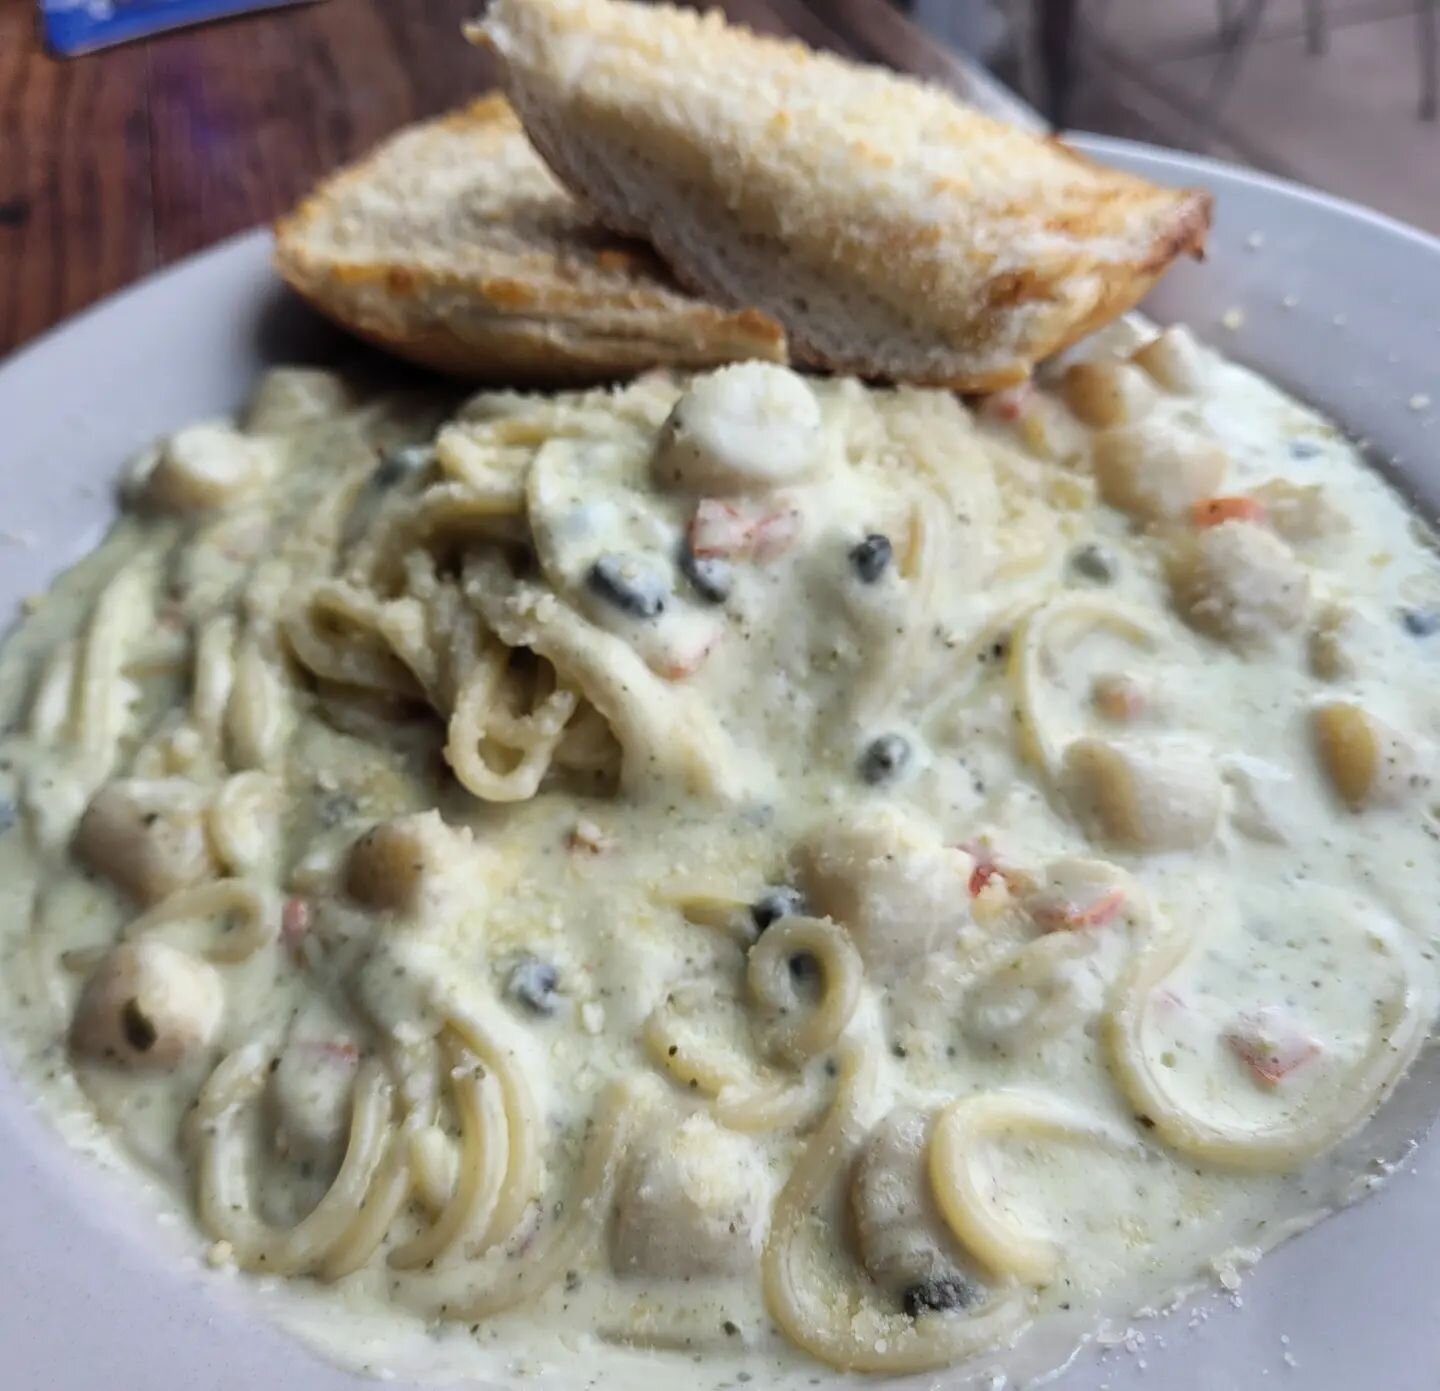 Bay scallops in a creamy pesto sauce with tomatoes, capers, and spaghetti noodles